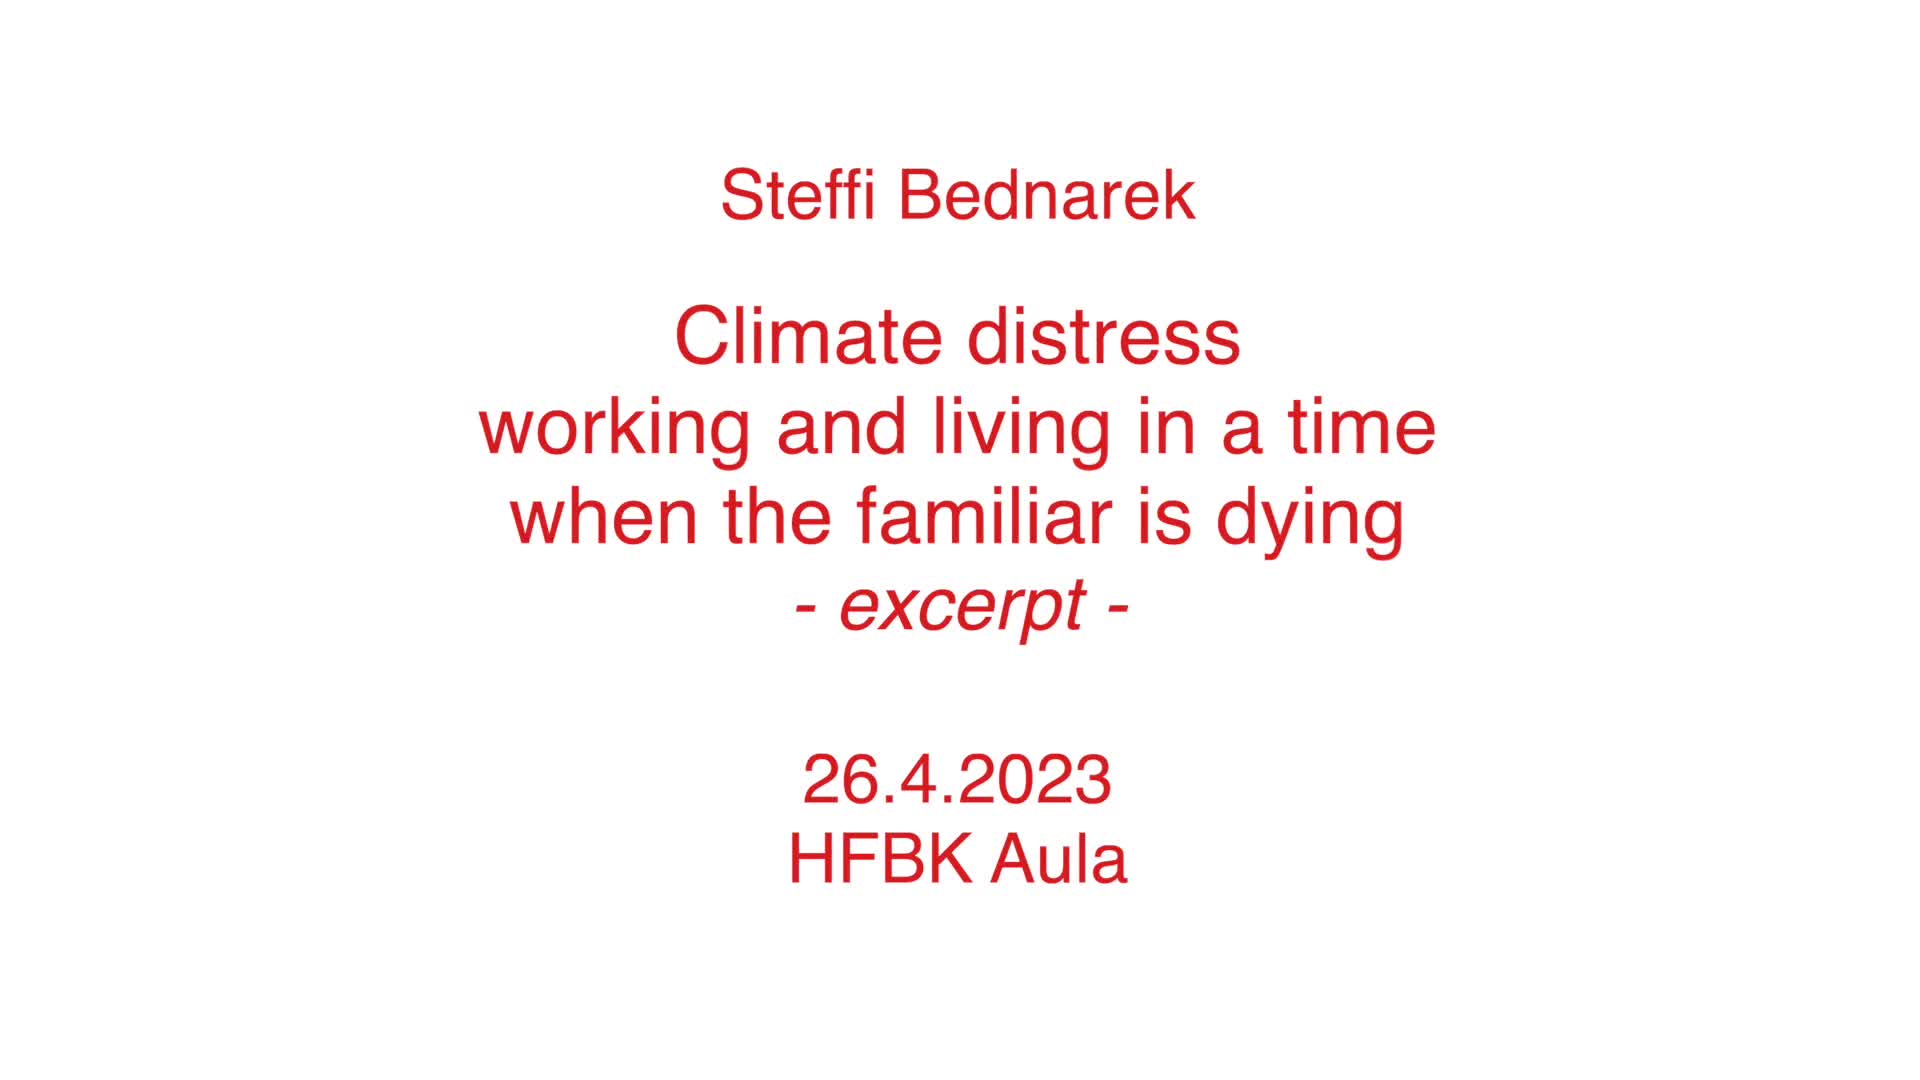 Vorschaubild - Climate distress - working and living in a time when the familiar is dying